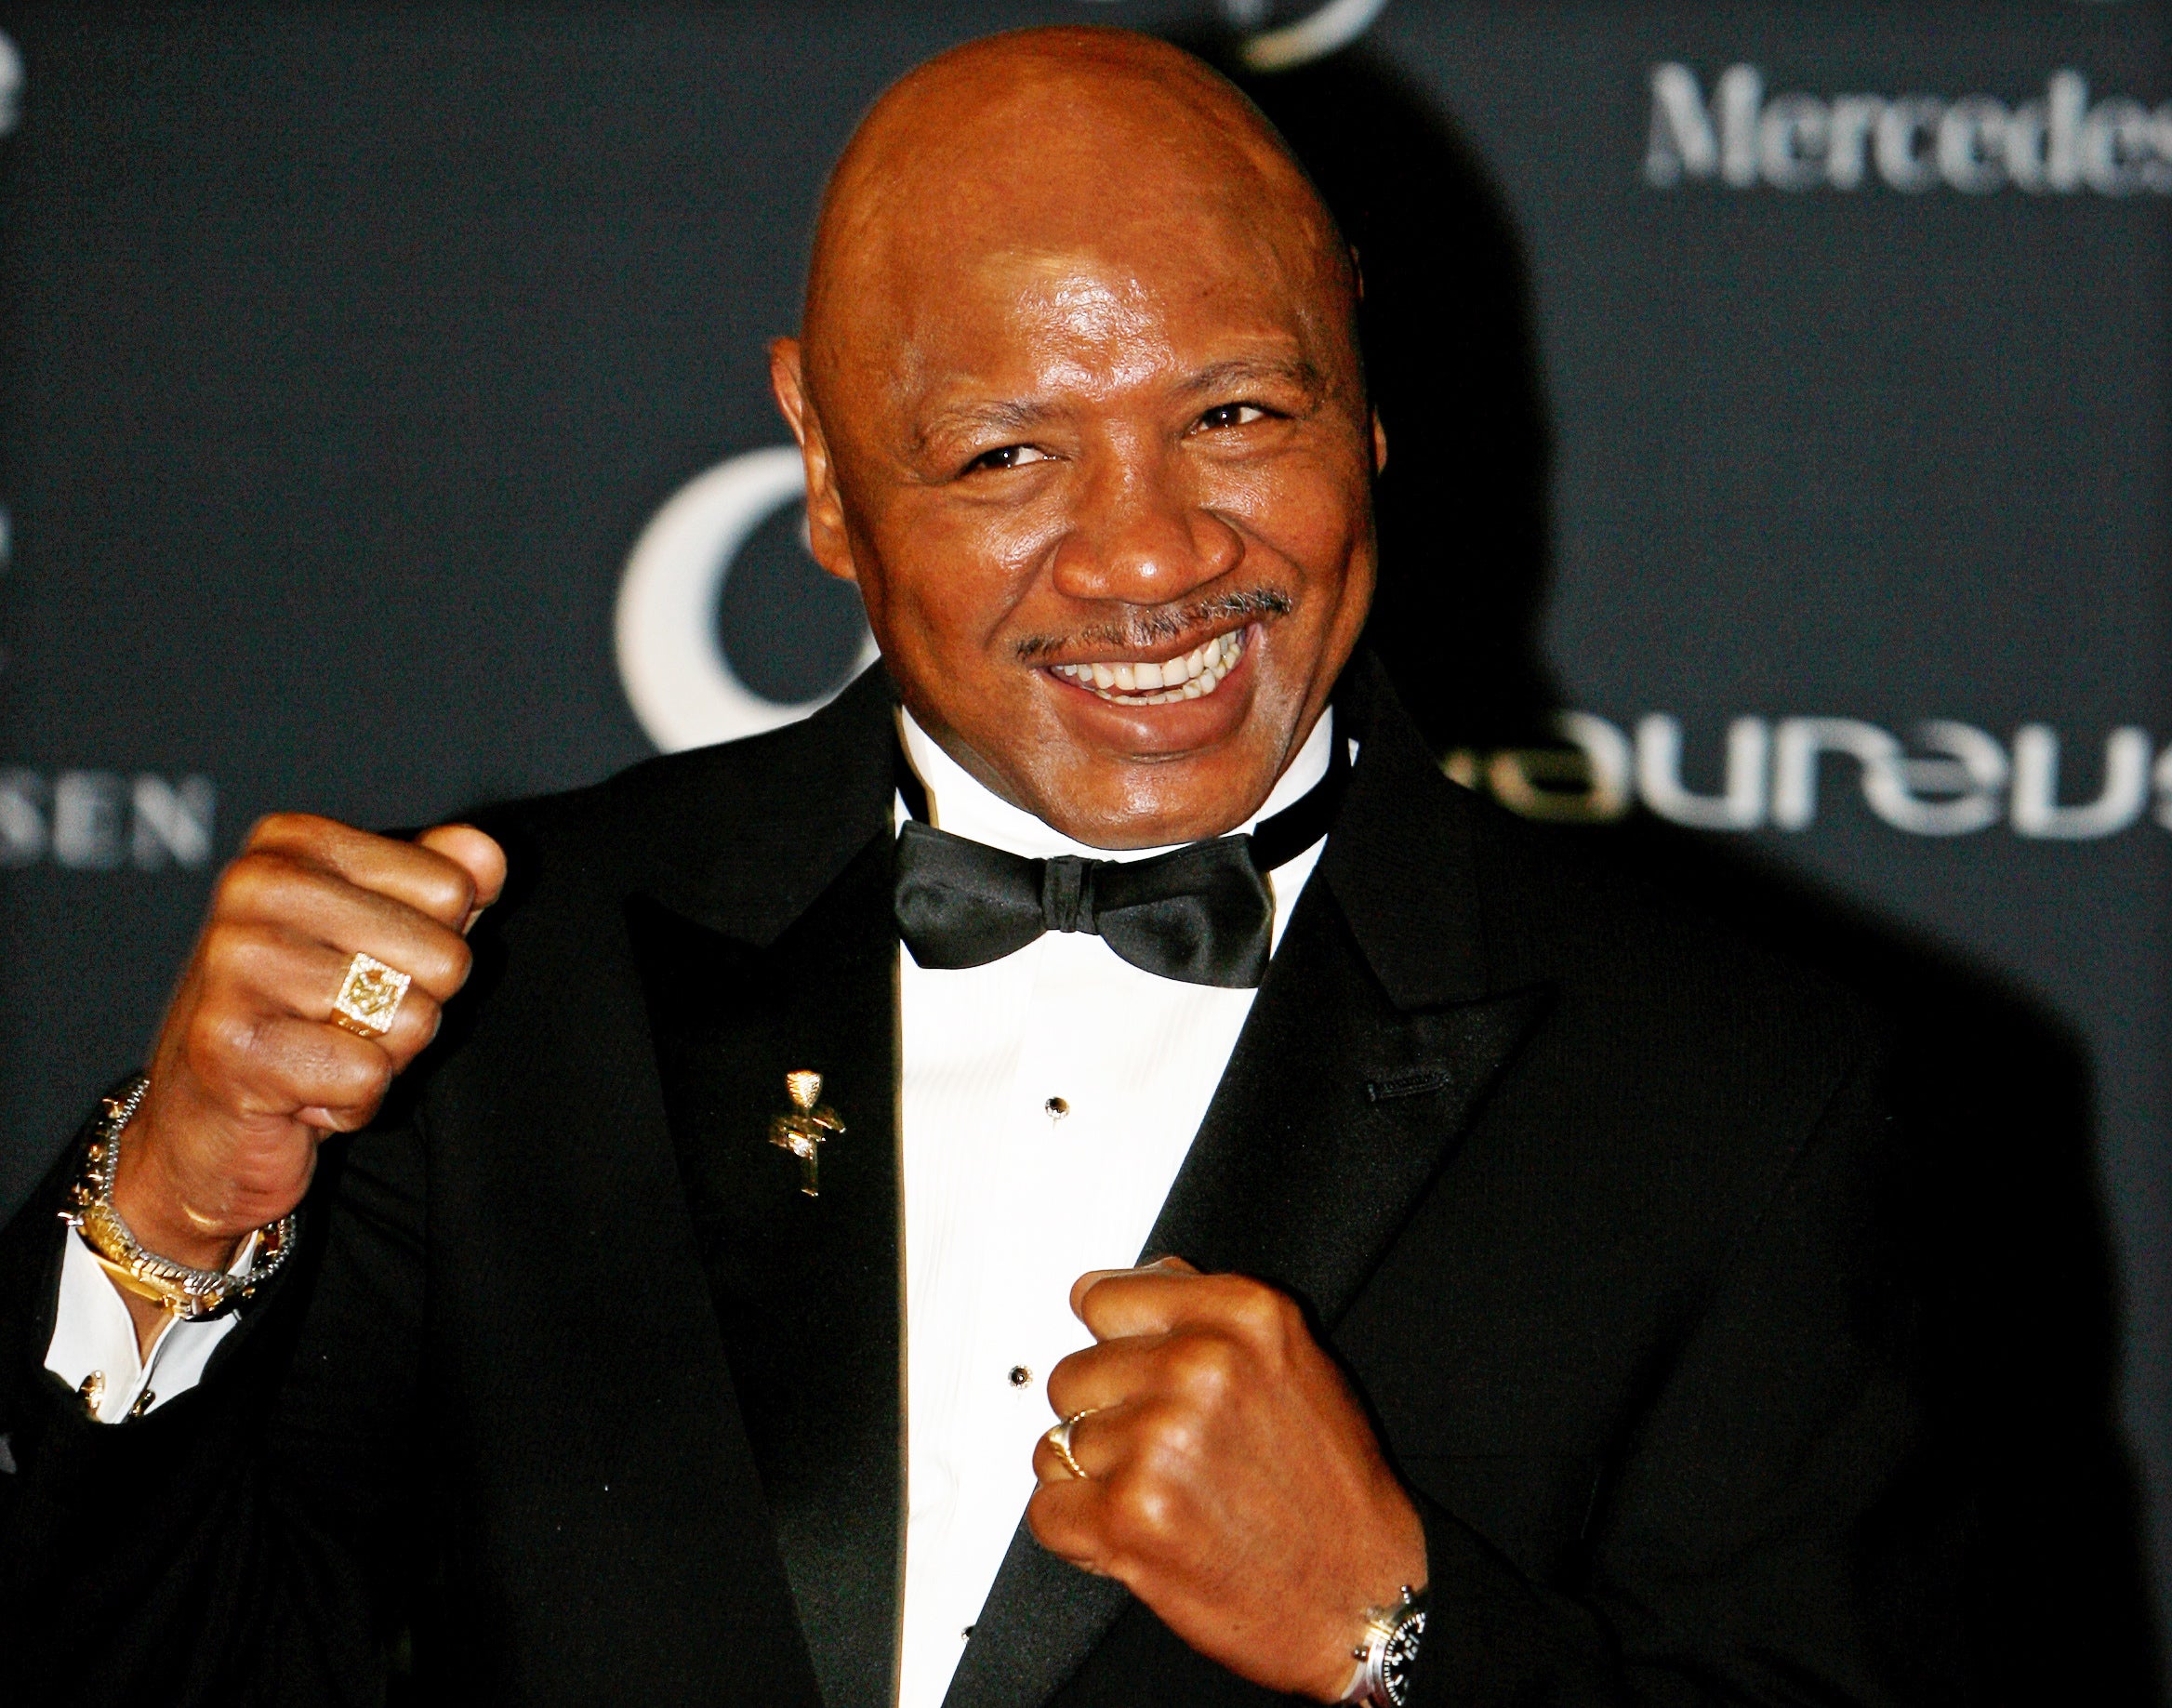 Hagler on the red carpet at the Laureus World Sports Awards in Abu Dhabi in 2011